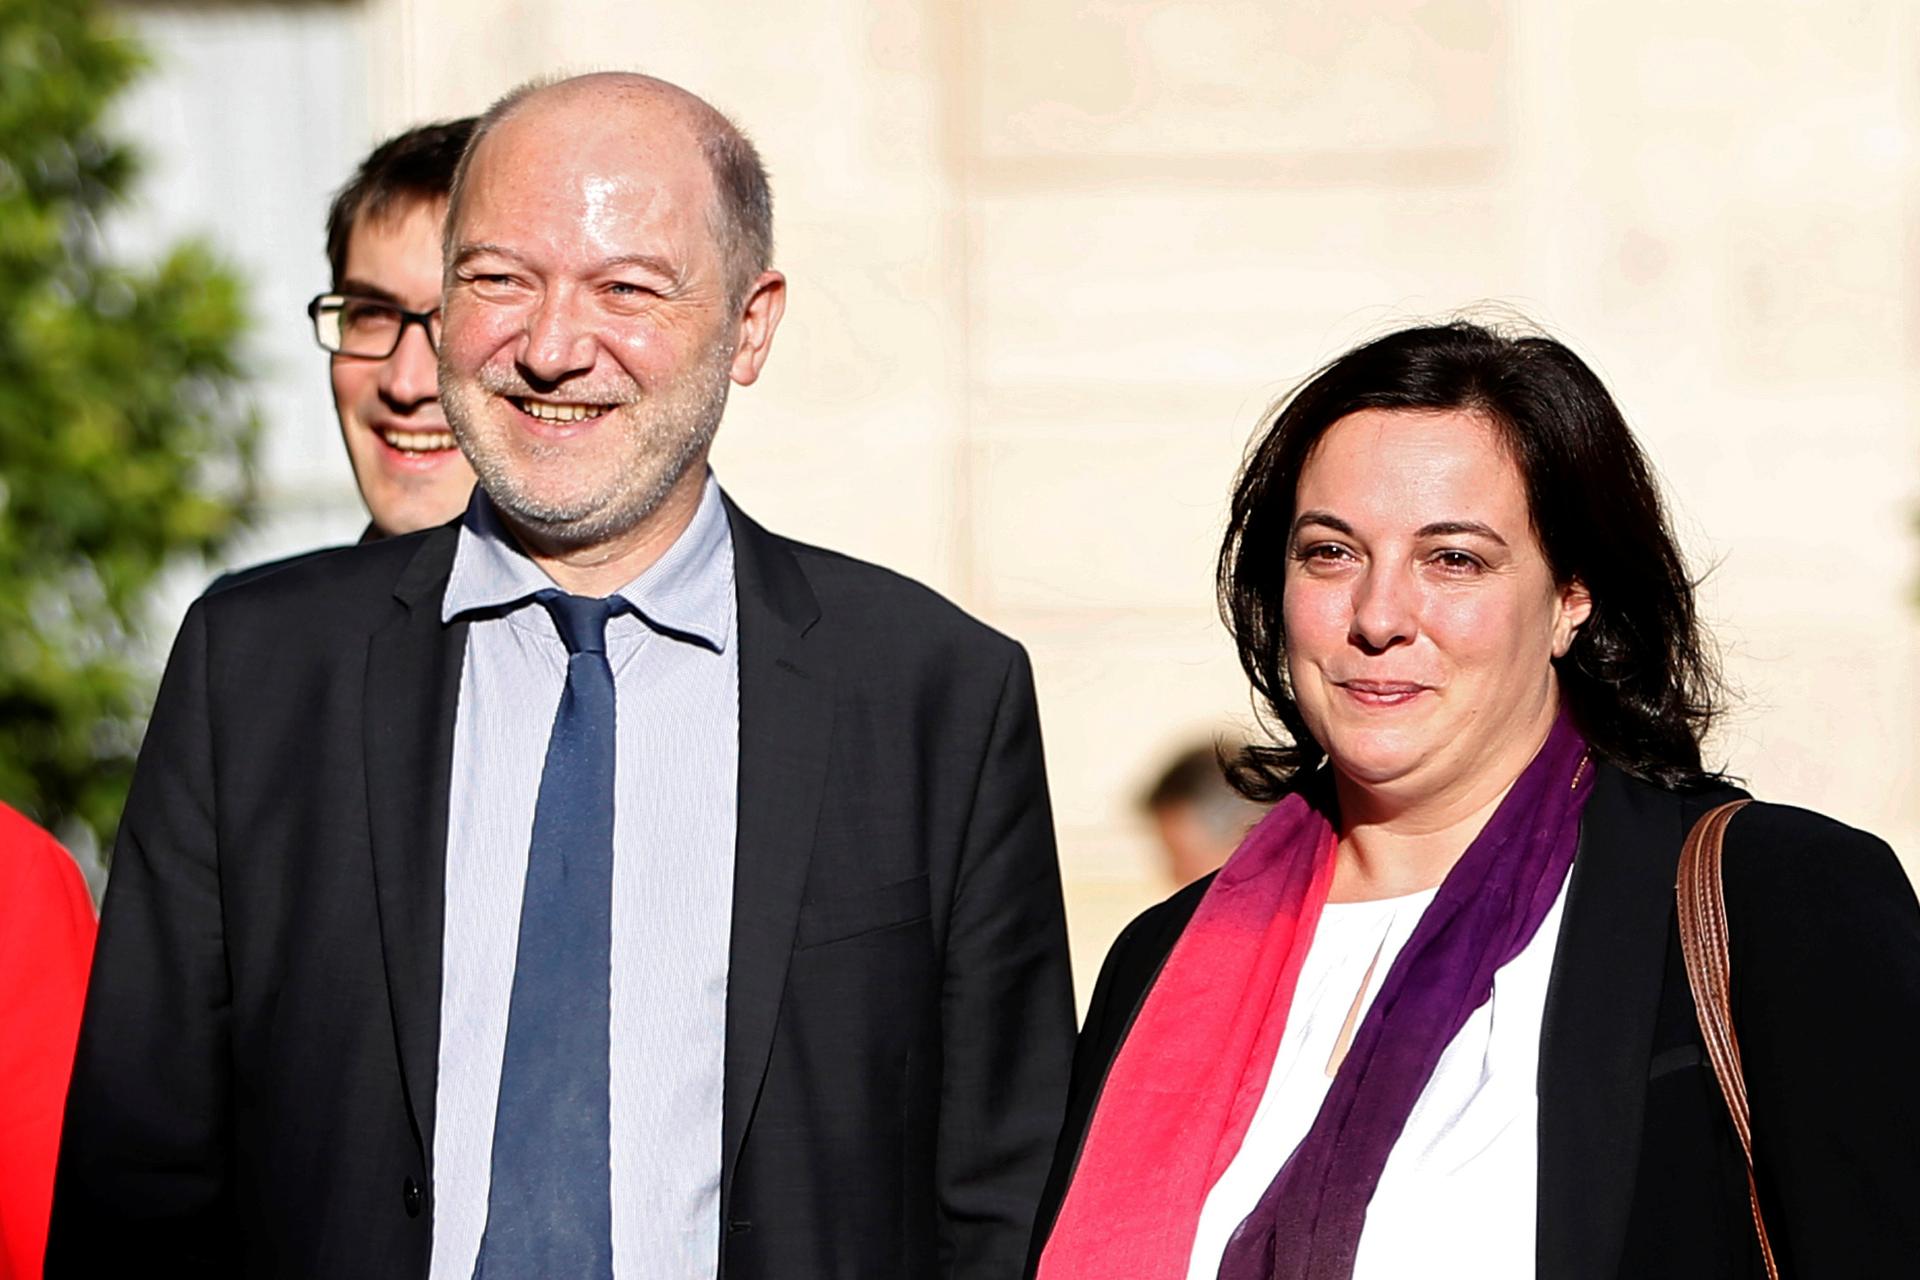 In France, leading politician quits post after harassment investigation